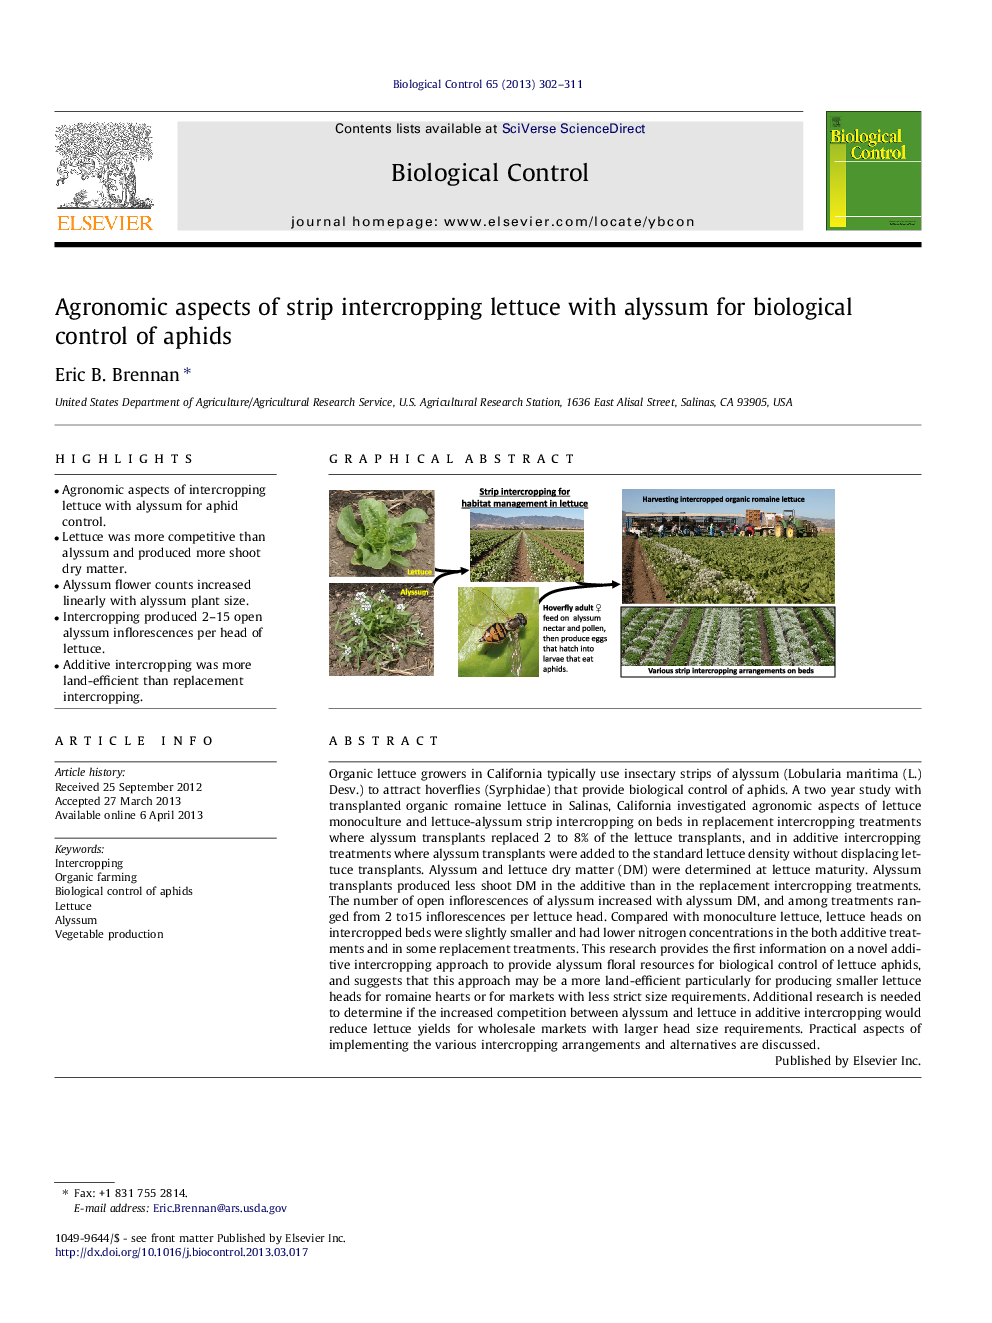 Agronomic aspects of strip intercropping lettuce with alyssum for biological control of aphids